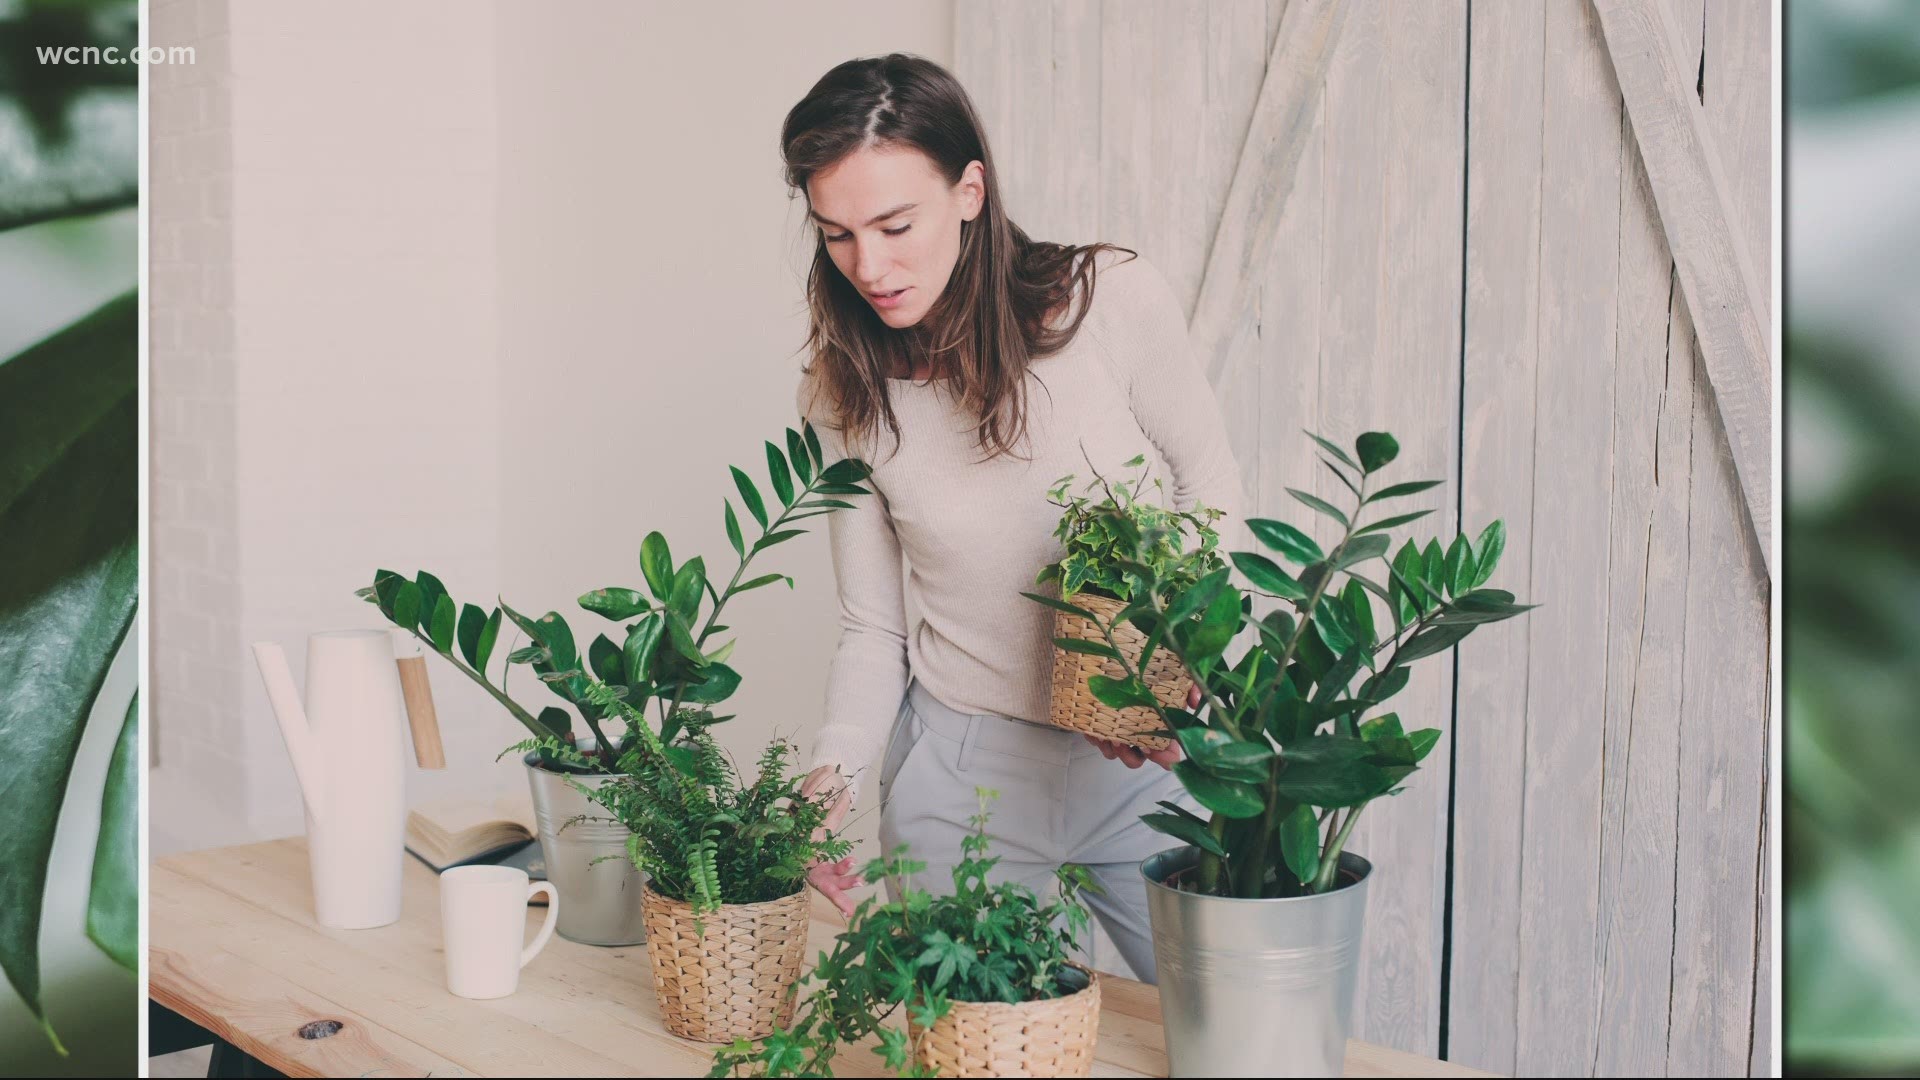 Bobbie Mabe, a horticultural therapist at HopeWay, talks about the impacts of plants and gardening on your mental health.